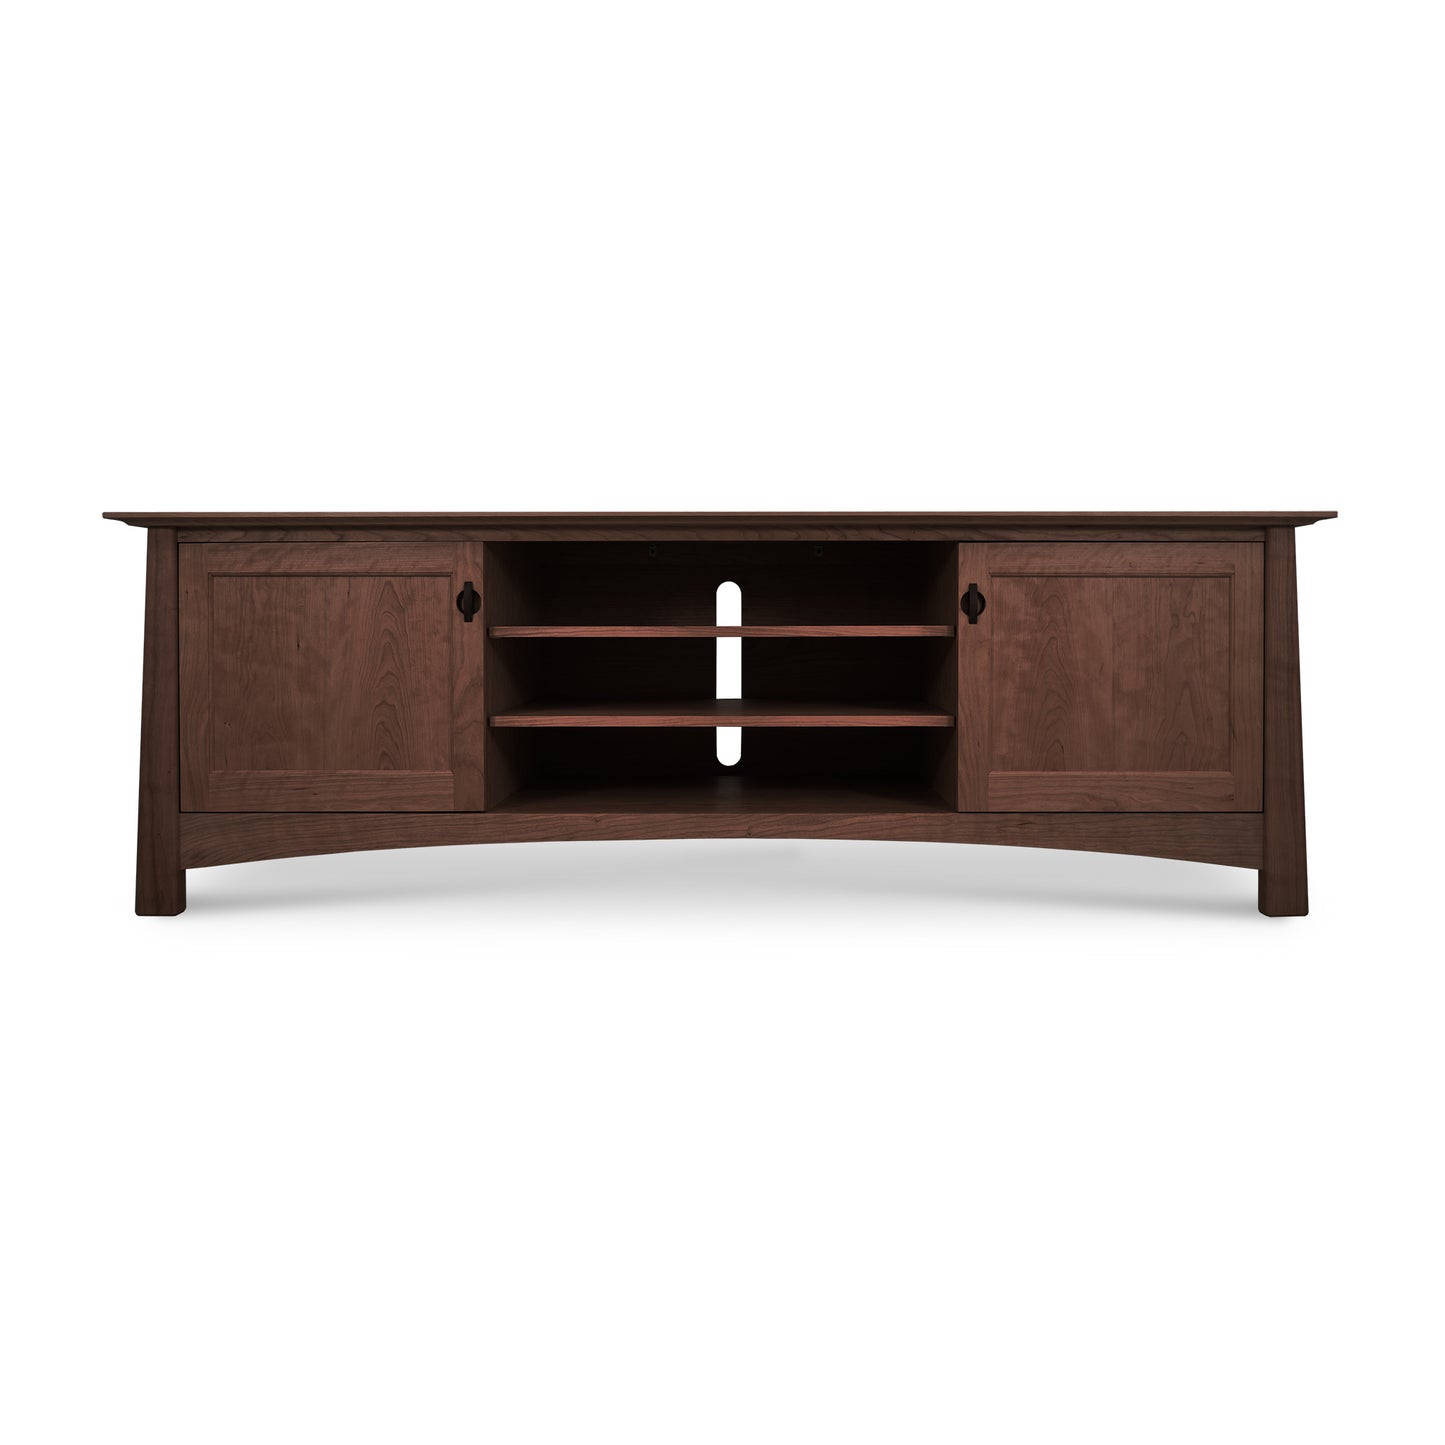 Cherry Moon 80" TV-Media Console from Maple Corner Woodworks, with curved edges, featuring two side cabinets and three central shelves, isolated on a white background.